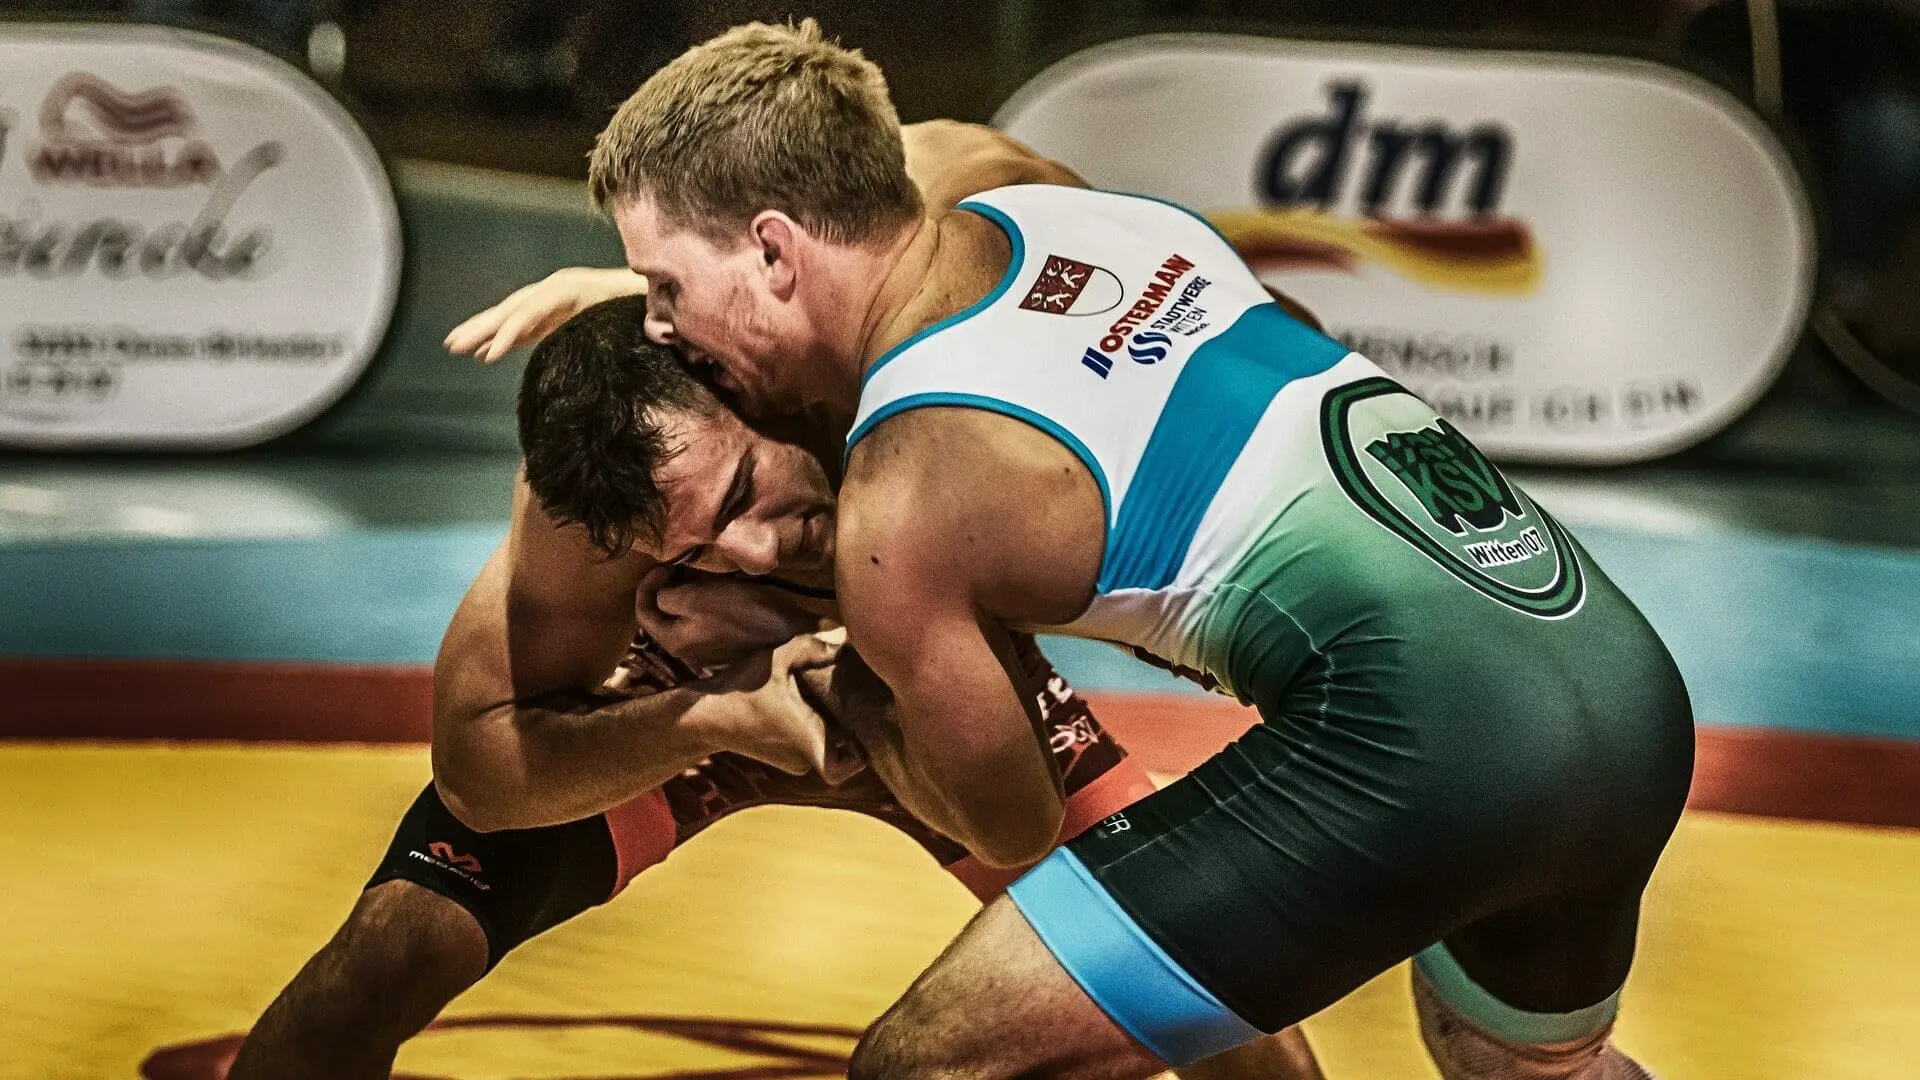 Wrestling sport for exercise and exhibition match between semi-professional wrestlers.